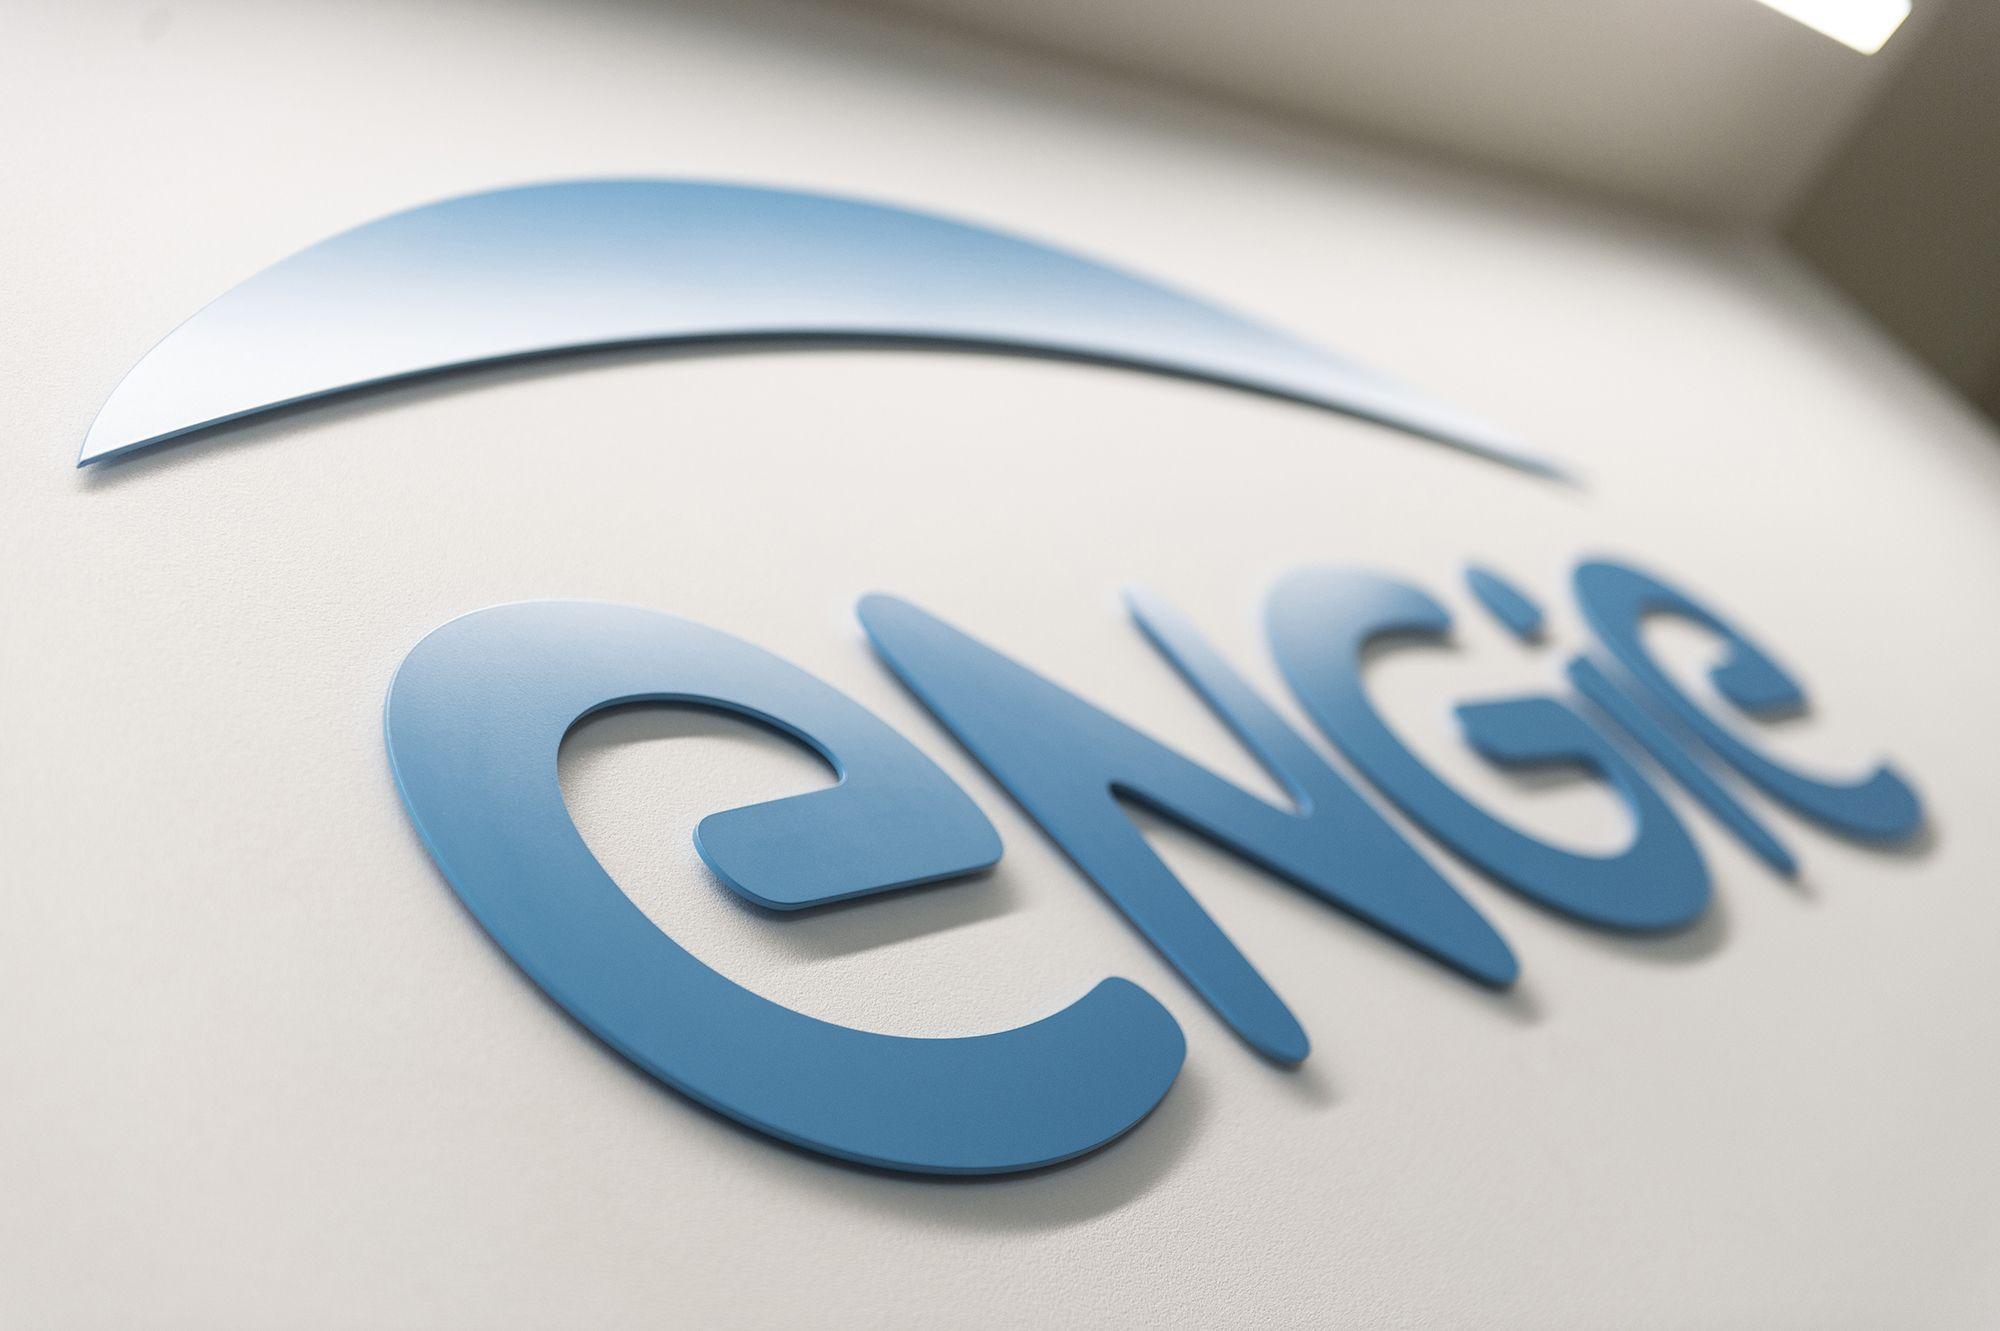 Engie Logo - Engie inaugurates second largest heat network in France